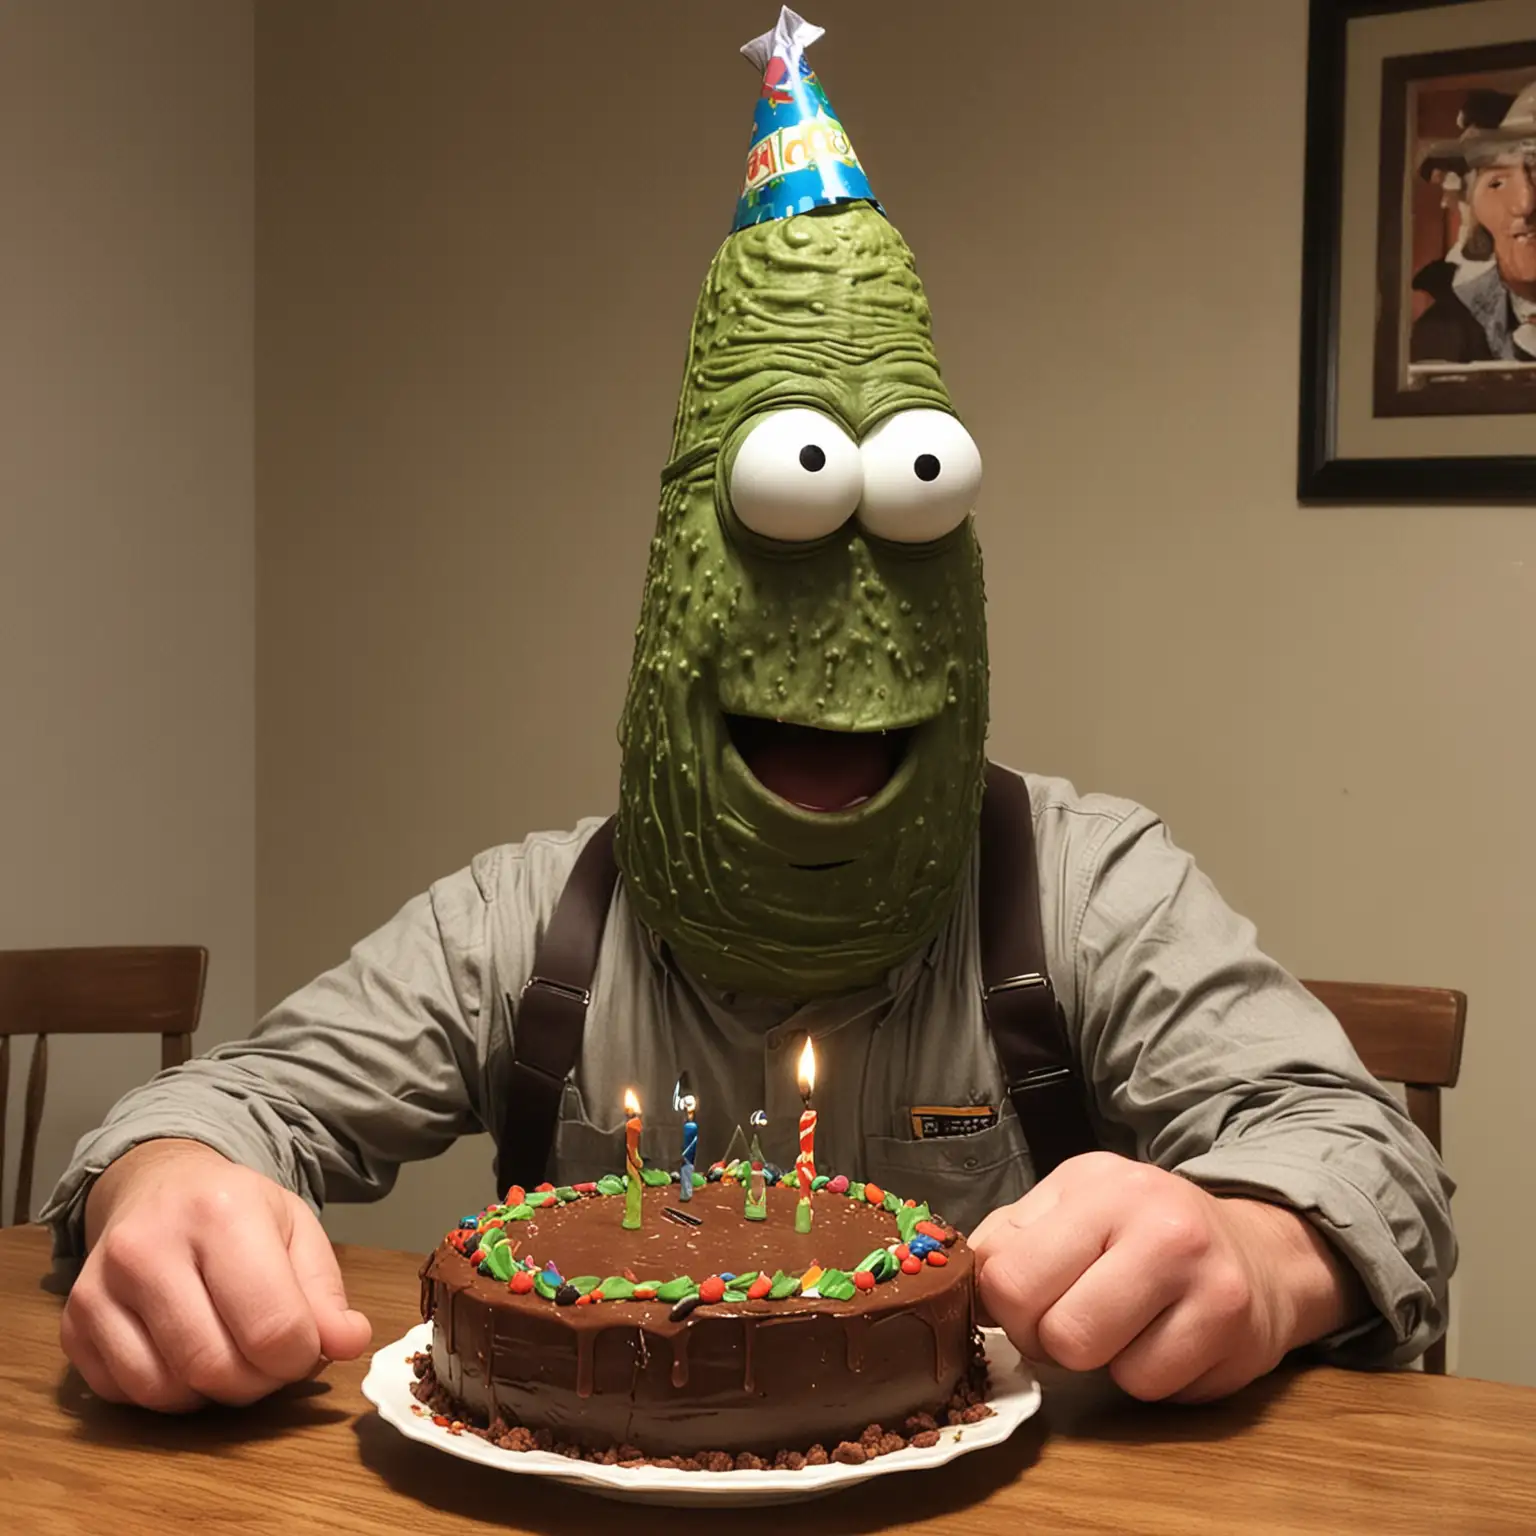 Pickle carl celebrating his birthday being an old 40 year-old pickle 